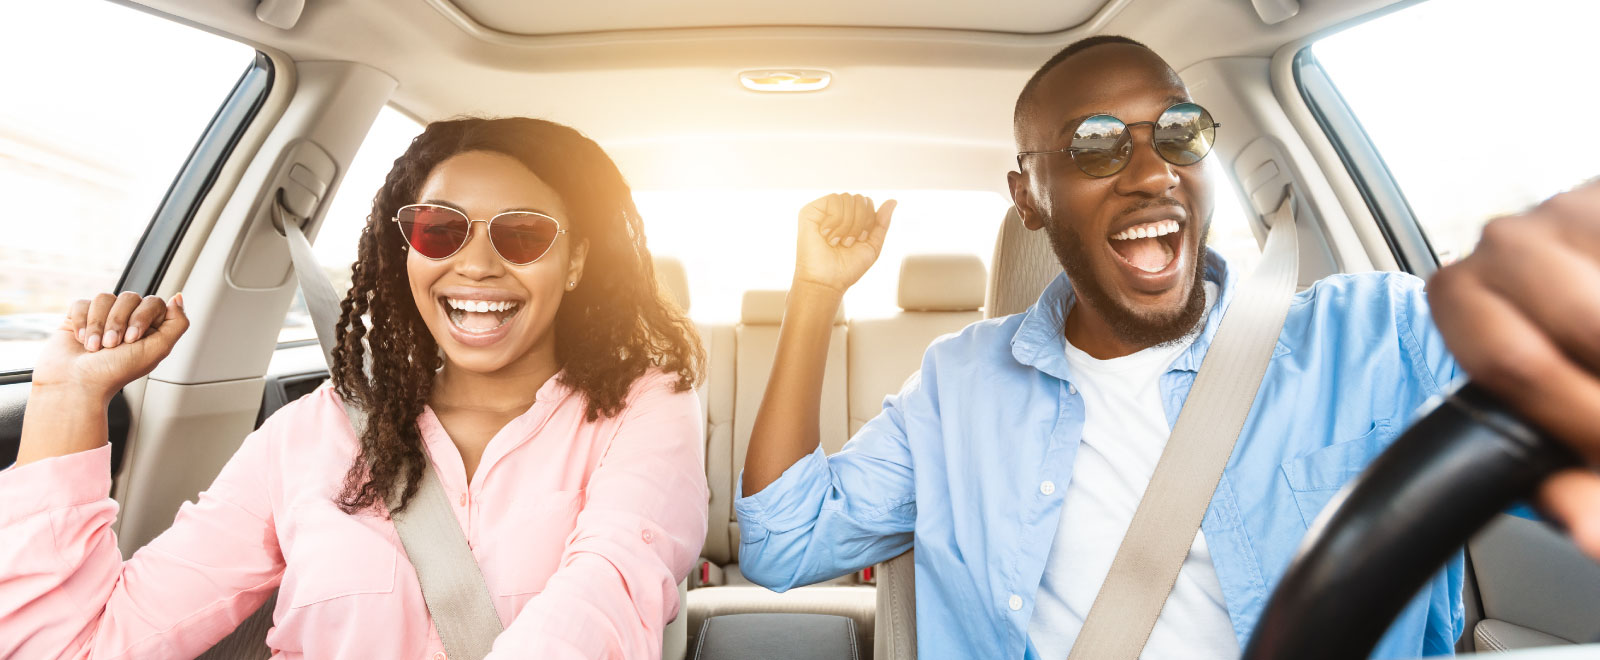 A man driving a car with a woman in the front seat and they are both excited. 